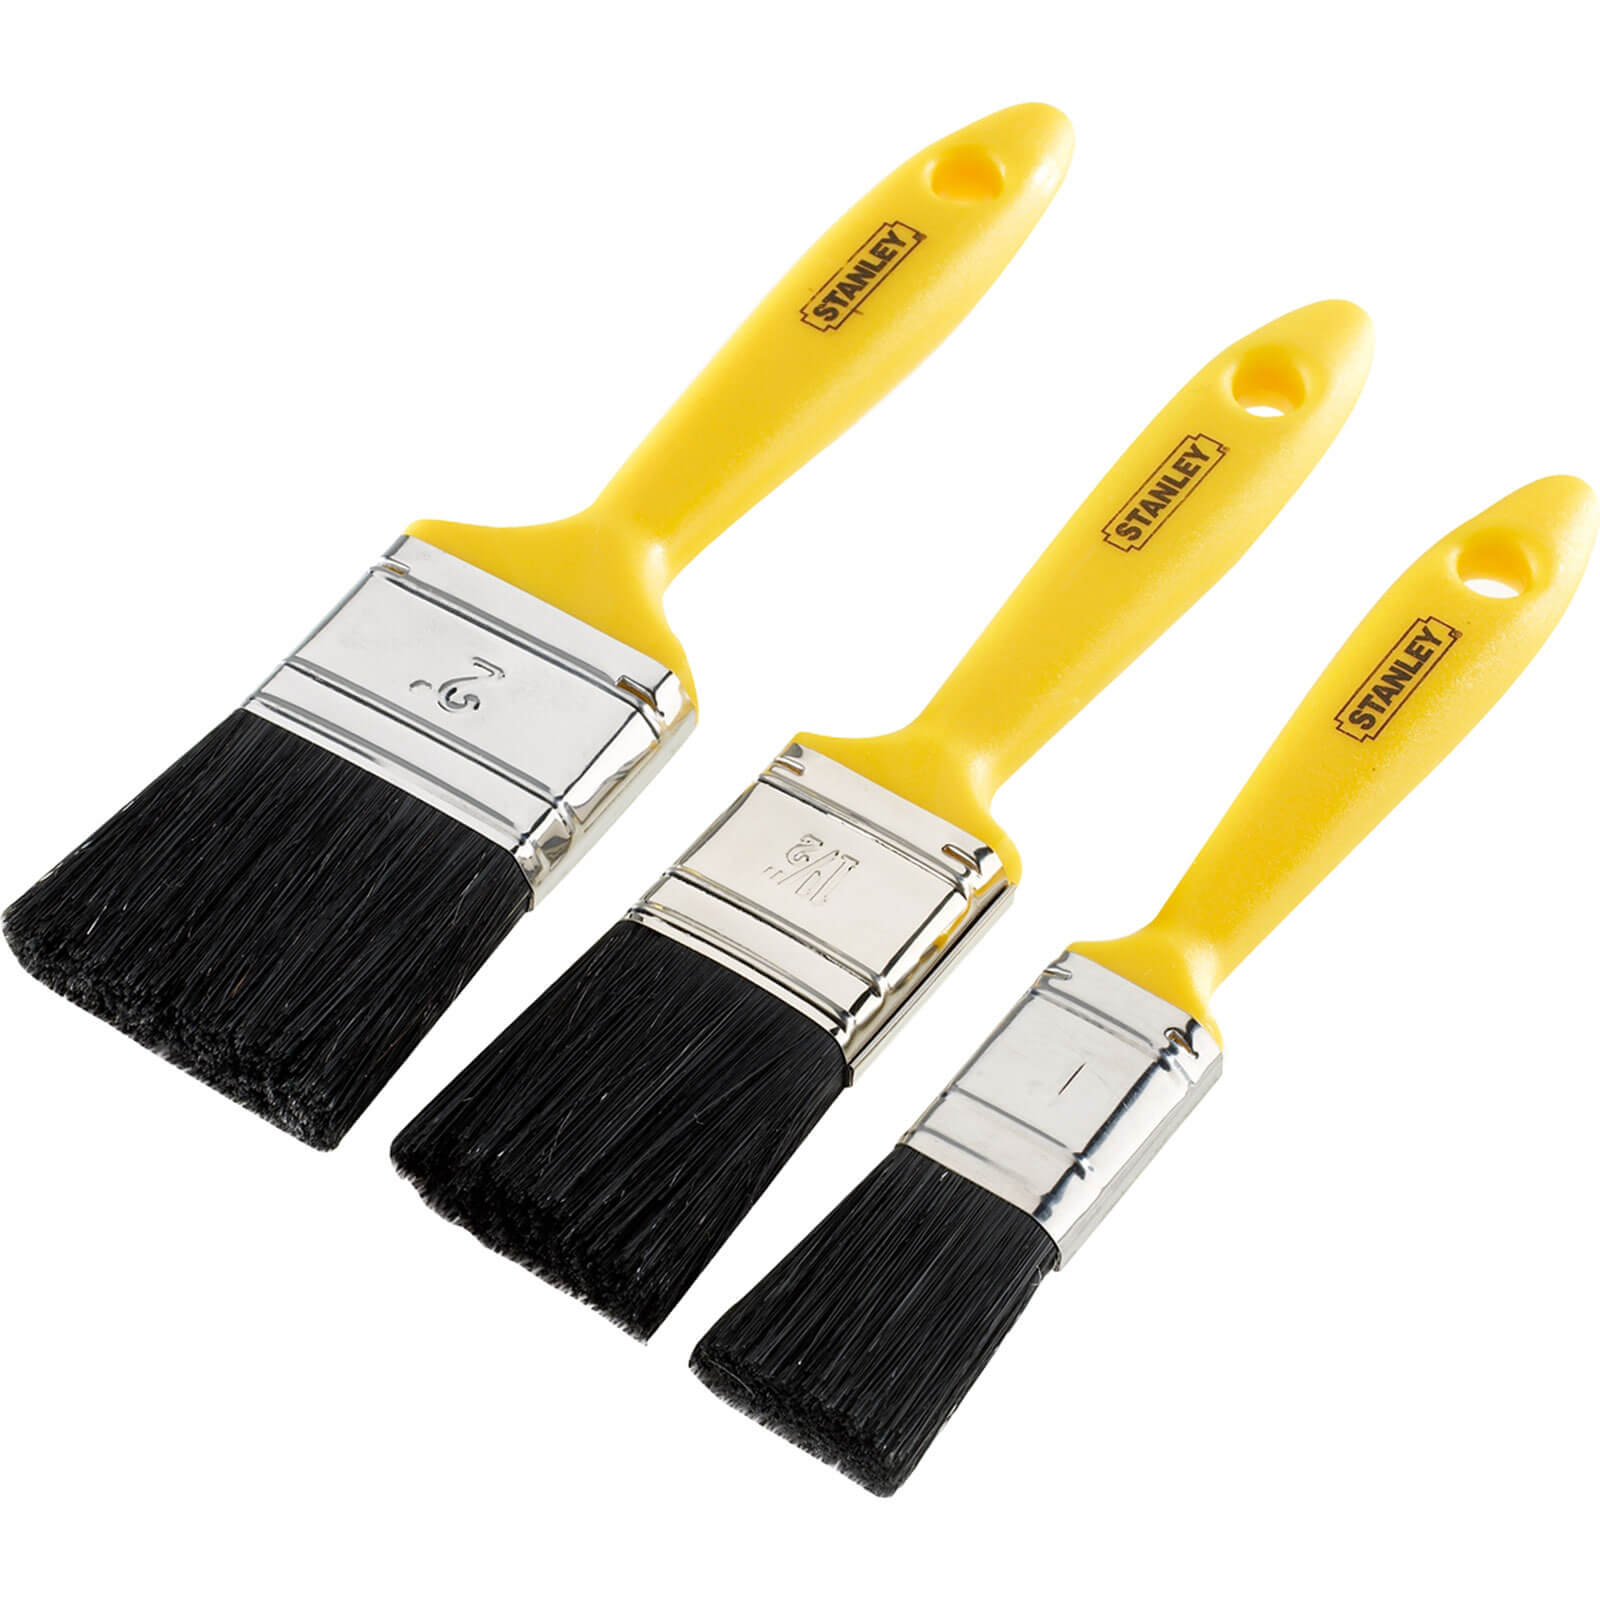 Photos - Putty Knife / Painting Tool Stanley 3 Piece Hobby Paint Brush Set 